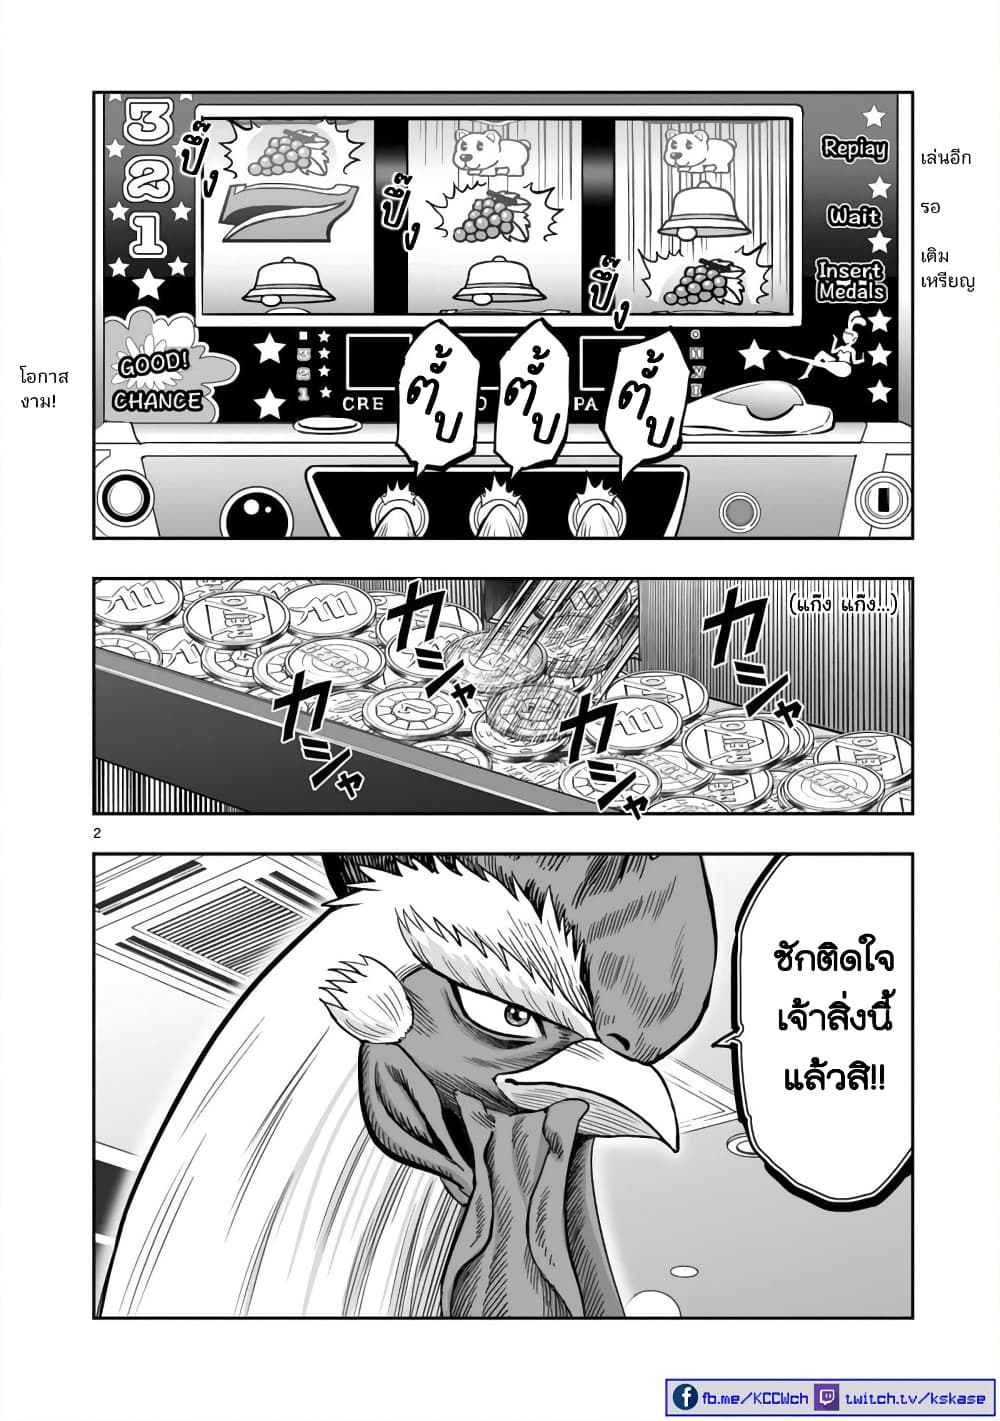 Rooster Fighter 12 (2)